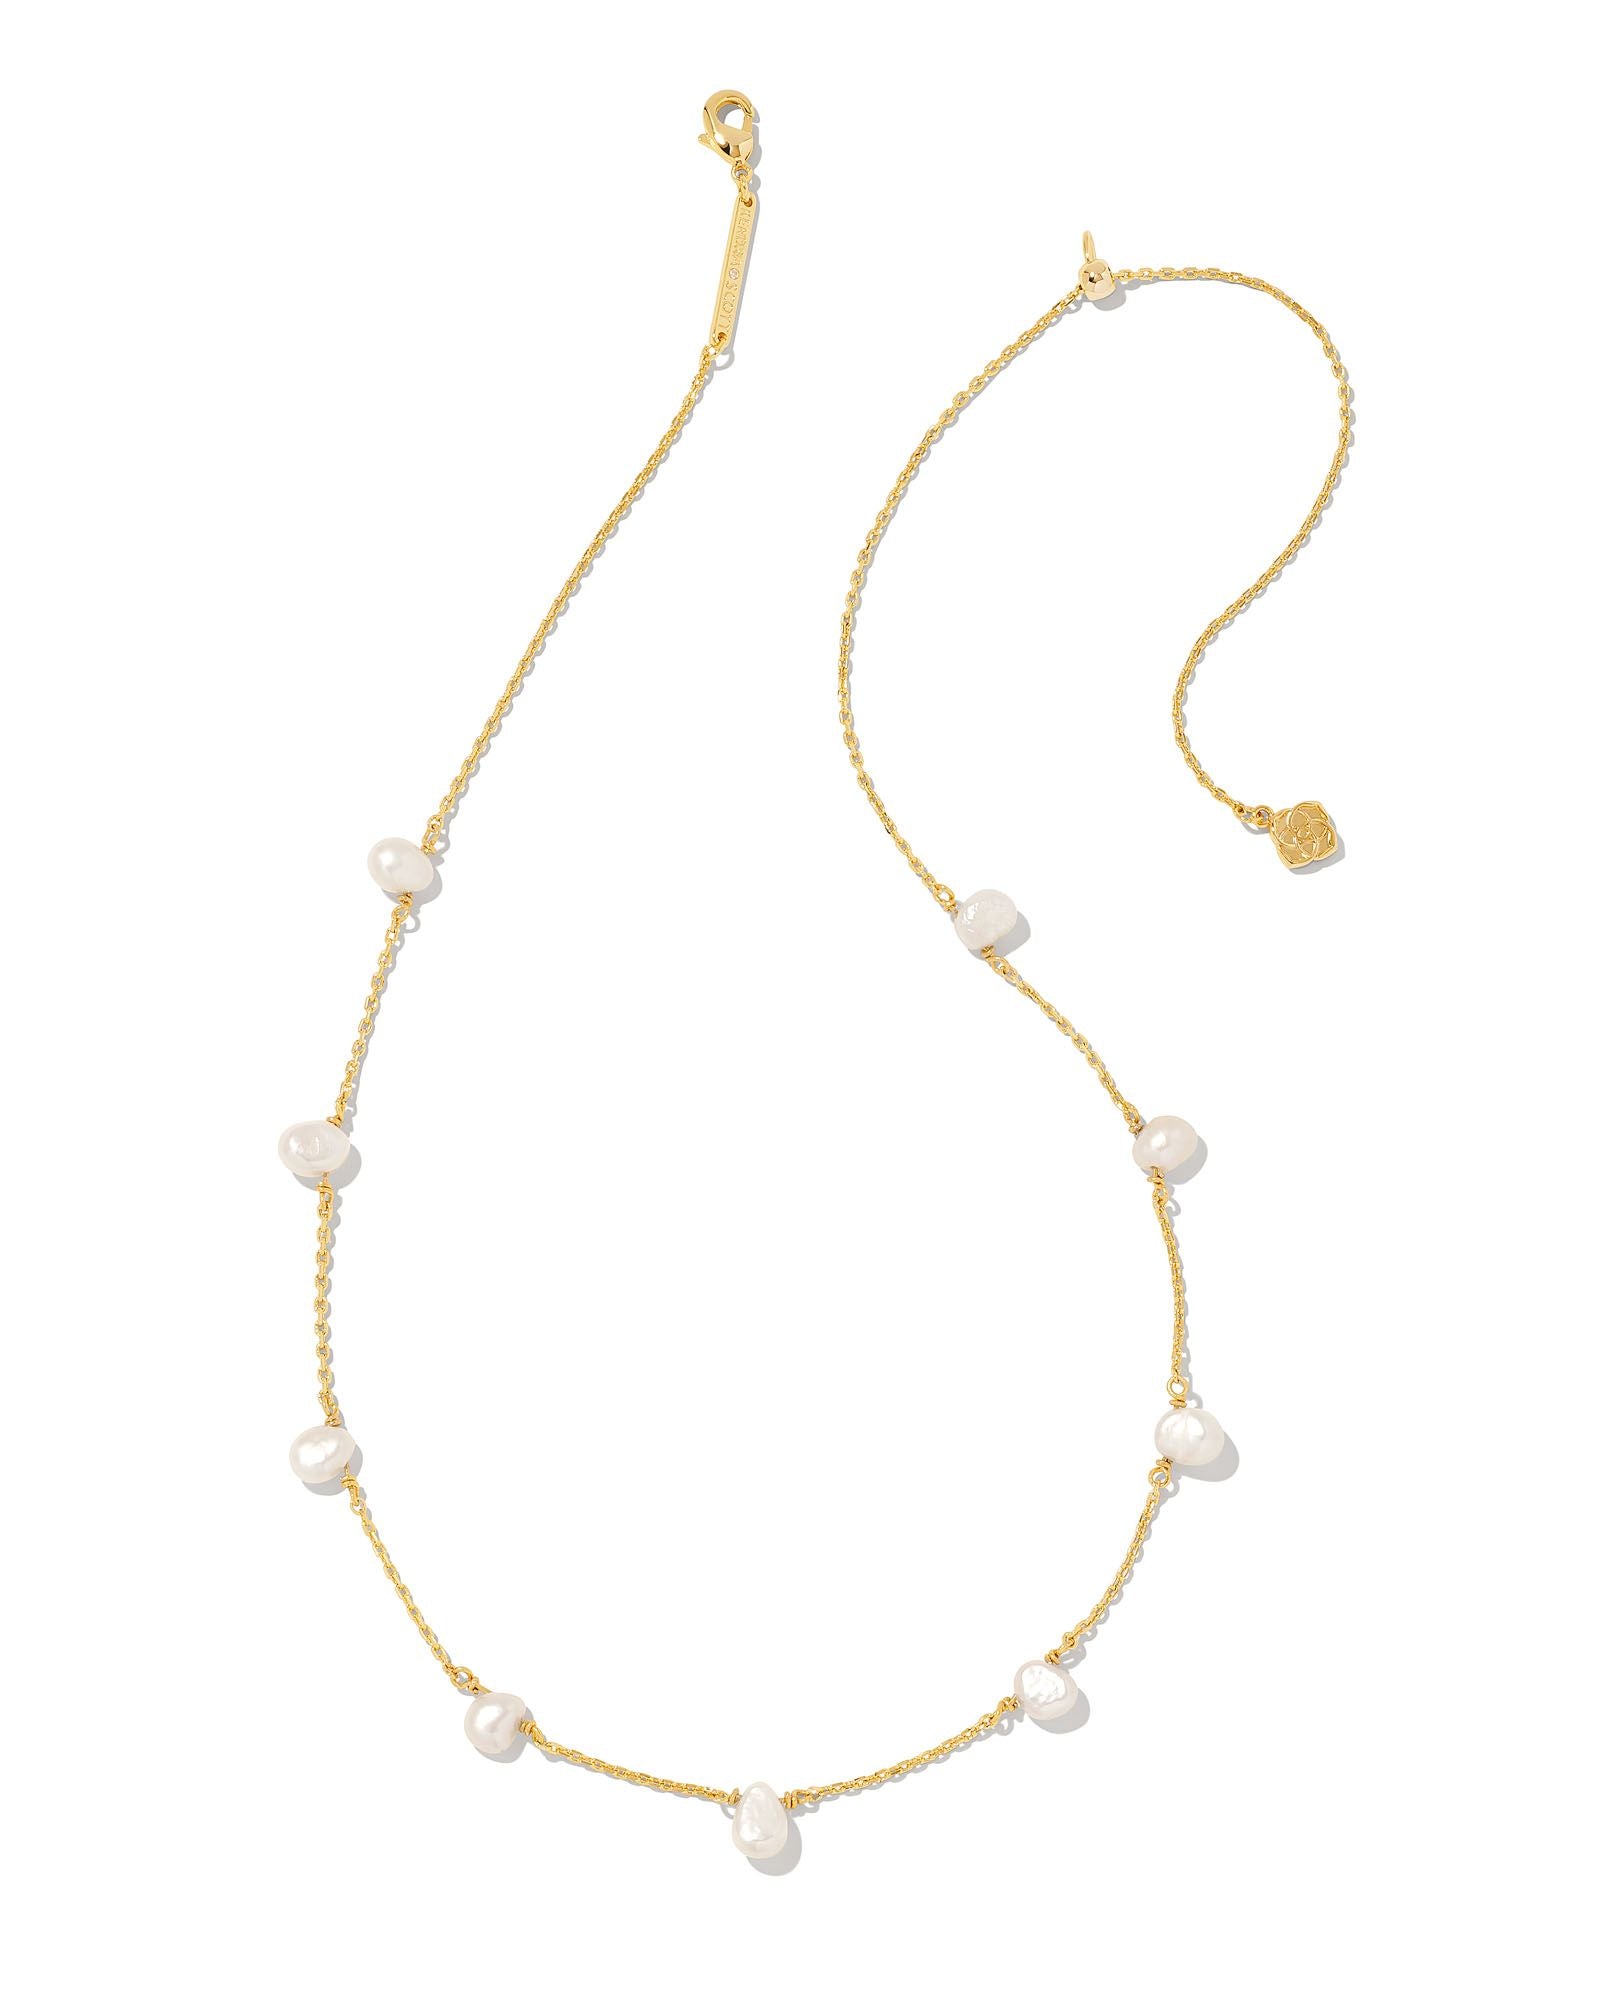 Kendra Scott LEIGHTON PEARL STRAND NECKLACE GOLD WHITE PEARL